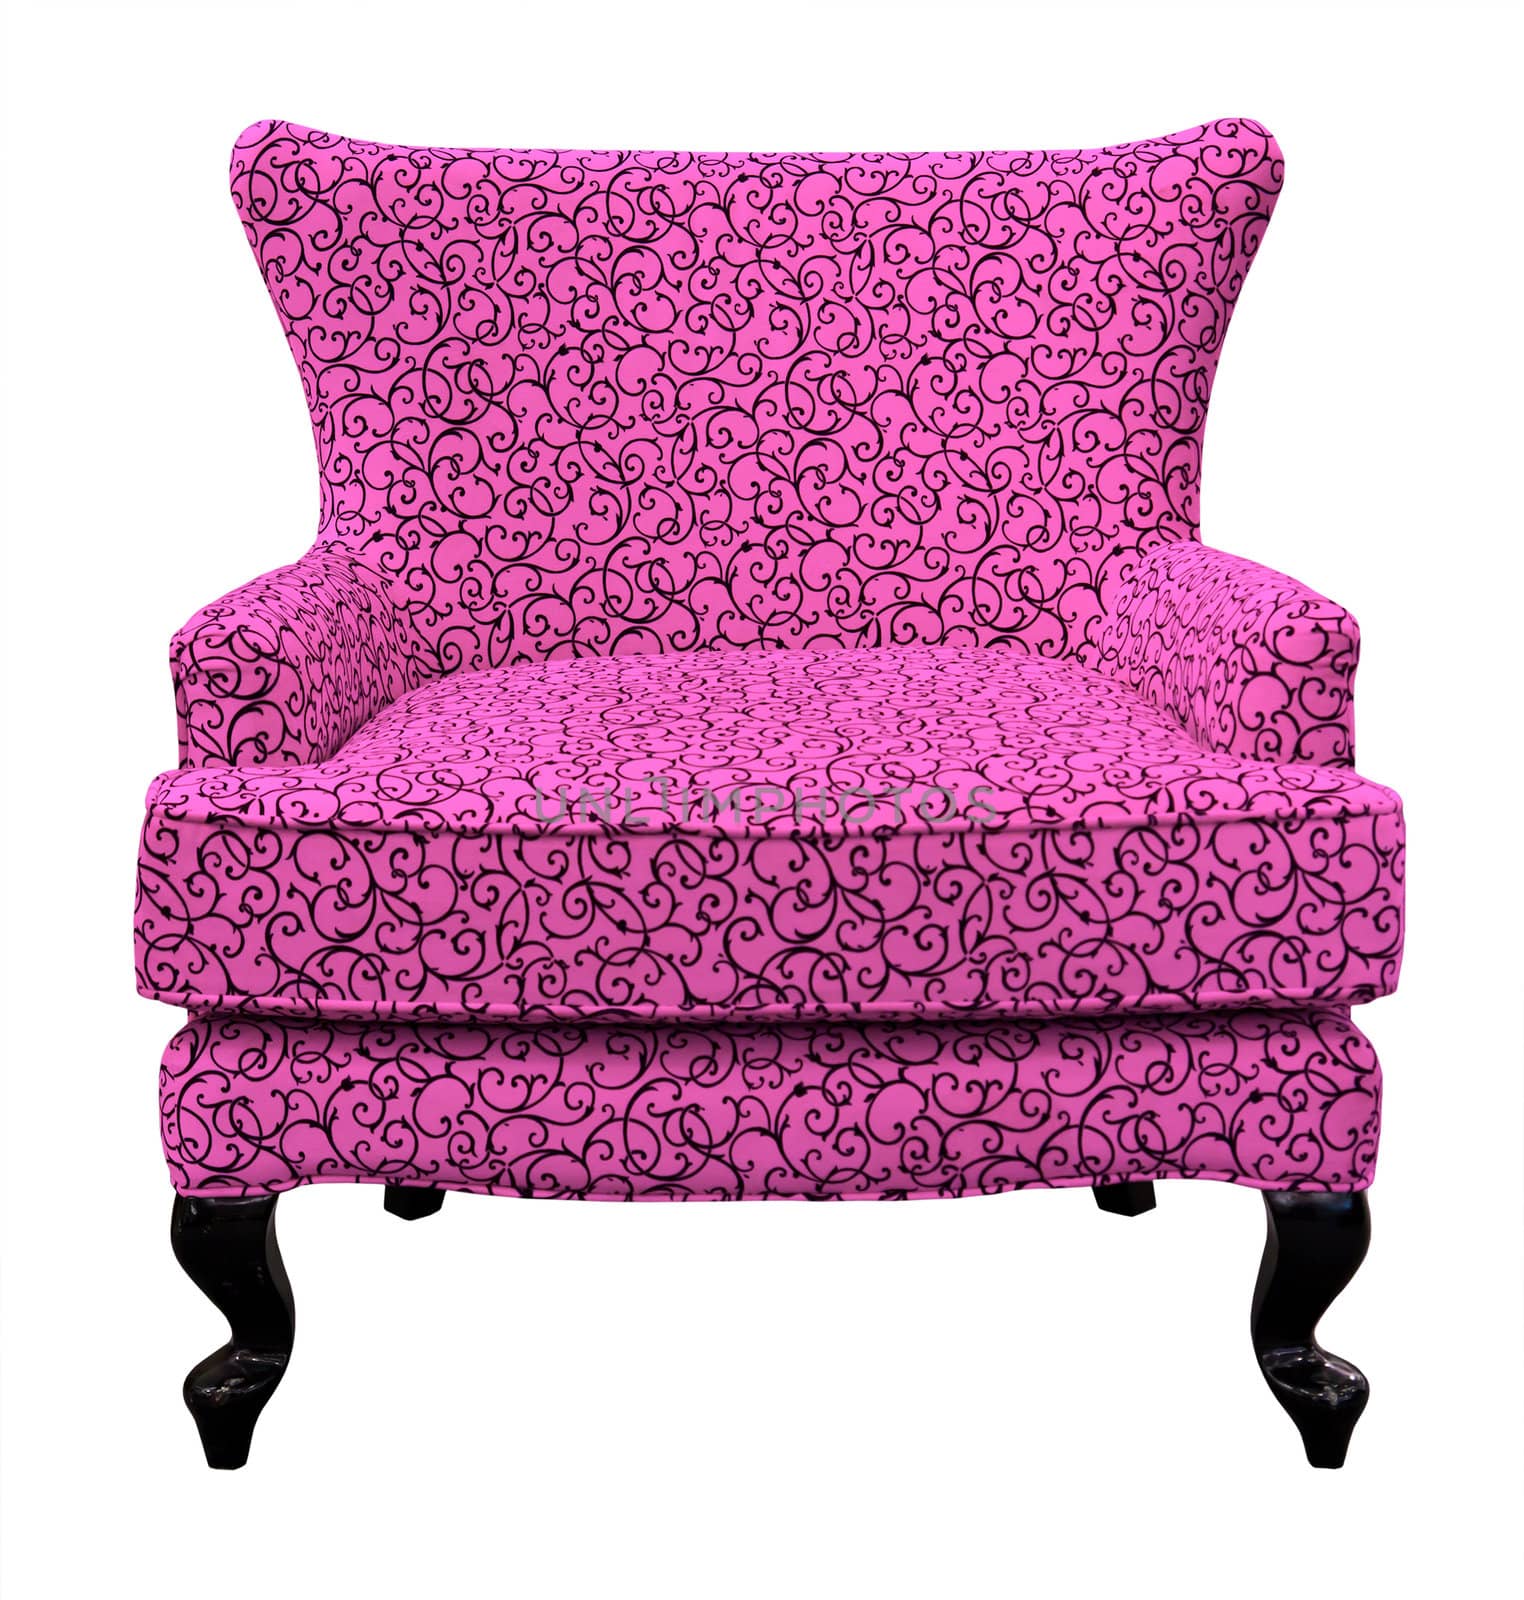 pink sofa isolated by tungphoto